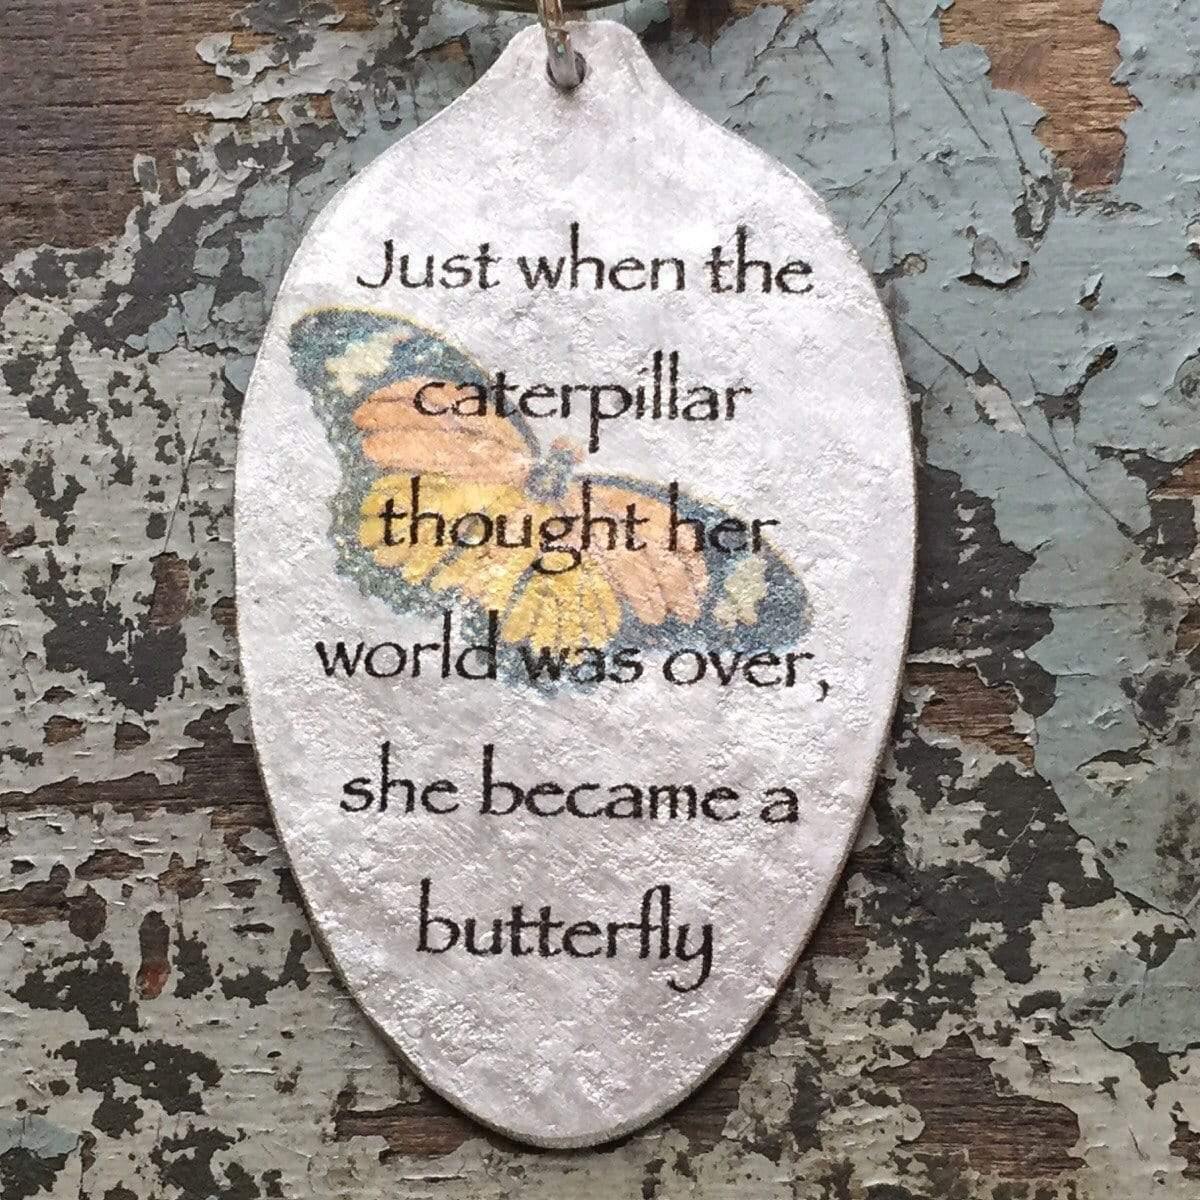 Just when the caterpillar thought her world was over, she became a butterfly Keychain, Silverware Jewelry, Spoon Keychain, Inspiring Gift - KyleeMae Designs